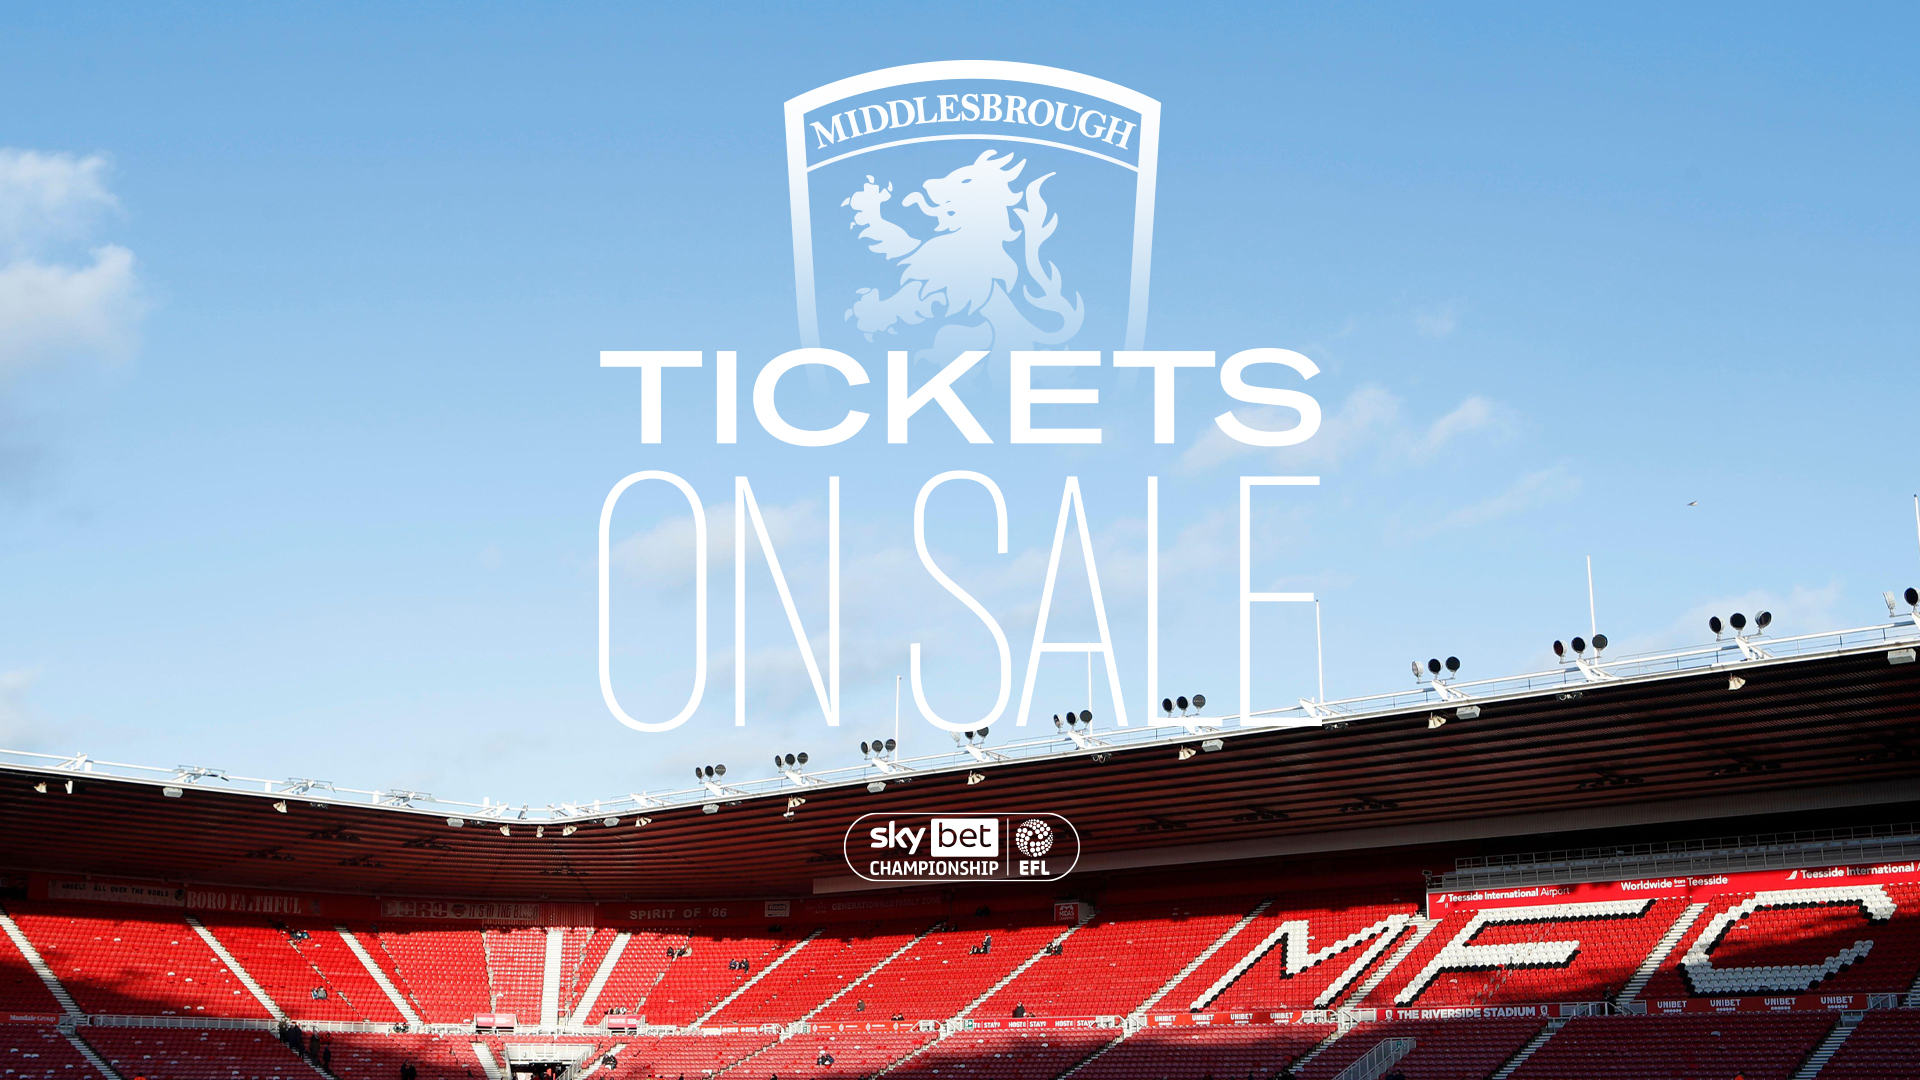 Middlesbrough Tickets on sale